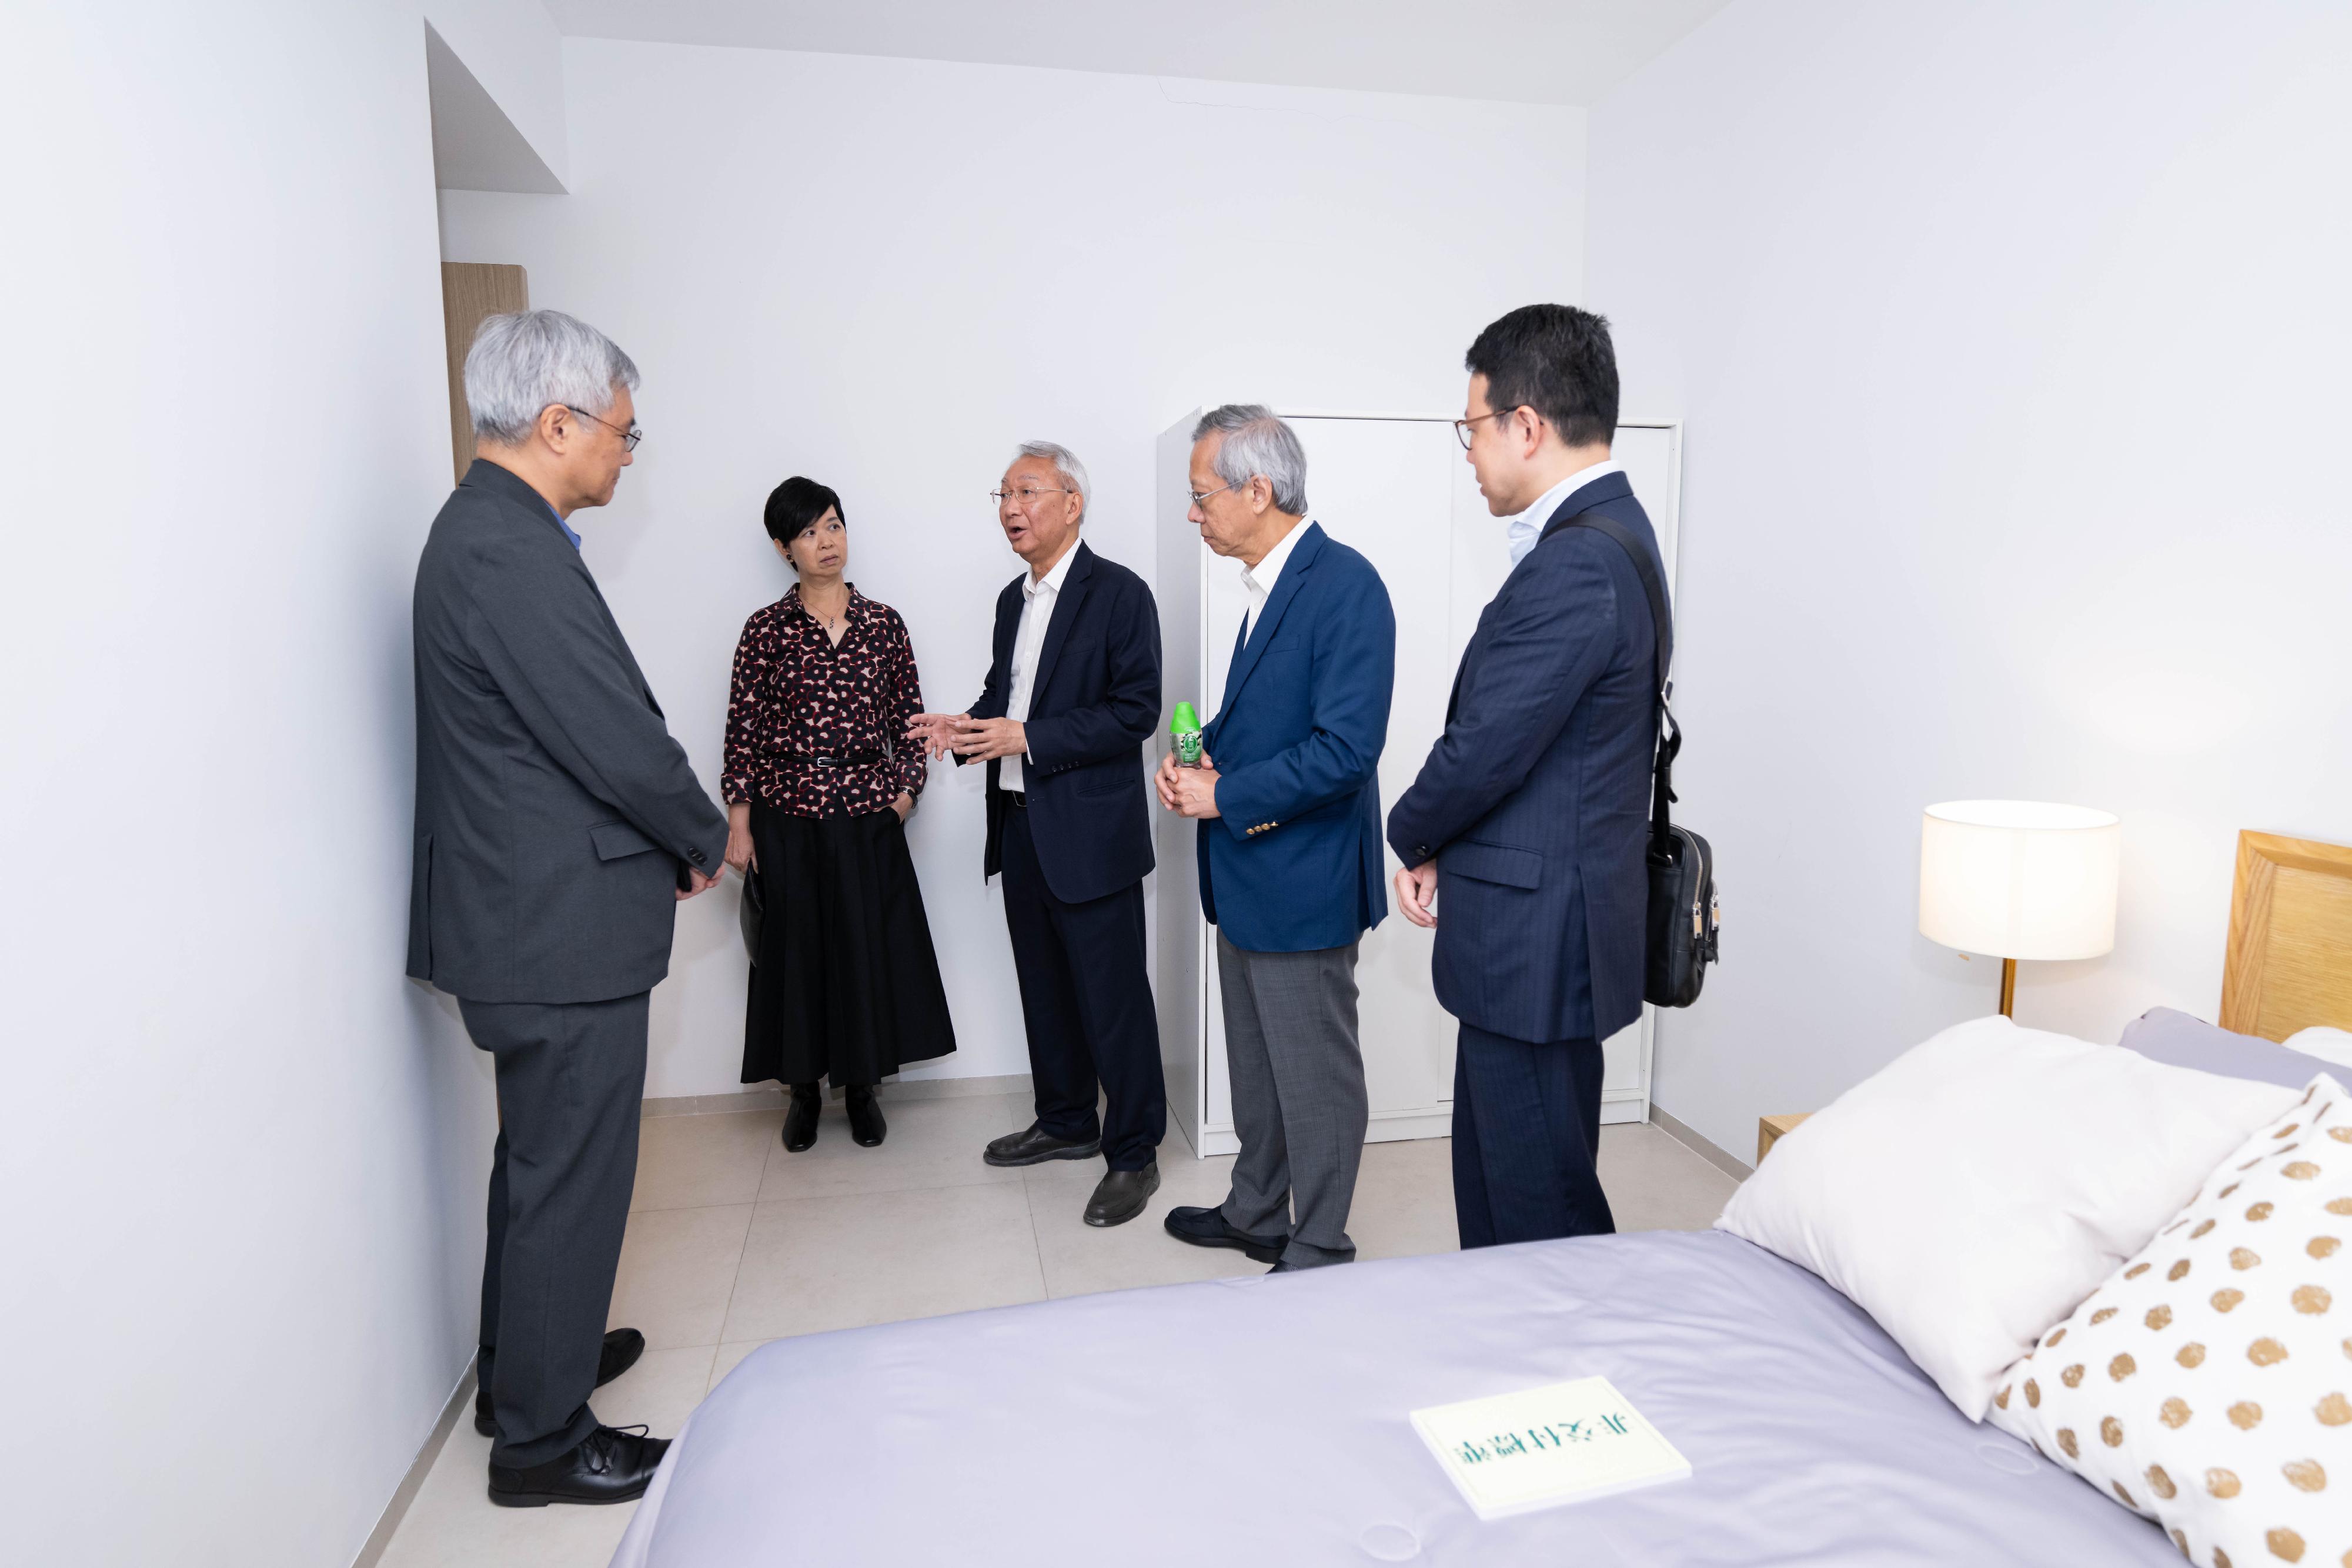 The Secretary for Housing, Ms Winnie Ho, visited Macao today (August 15) to exchange views with government officials of the Macao Special Administrative Region on public housing system and policies, overall planning of Macao and progress of public works projects, as well as inspecting housing and urban development projects in Macao. Photo shows Ms Ho (second left) visiting a temporary housing project of the Macau Urban Renewal Limited.